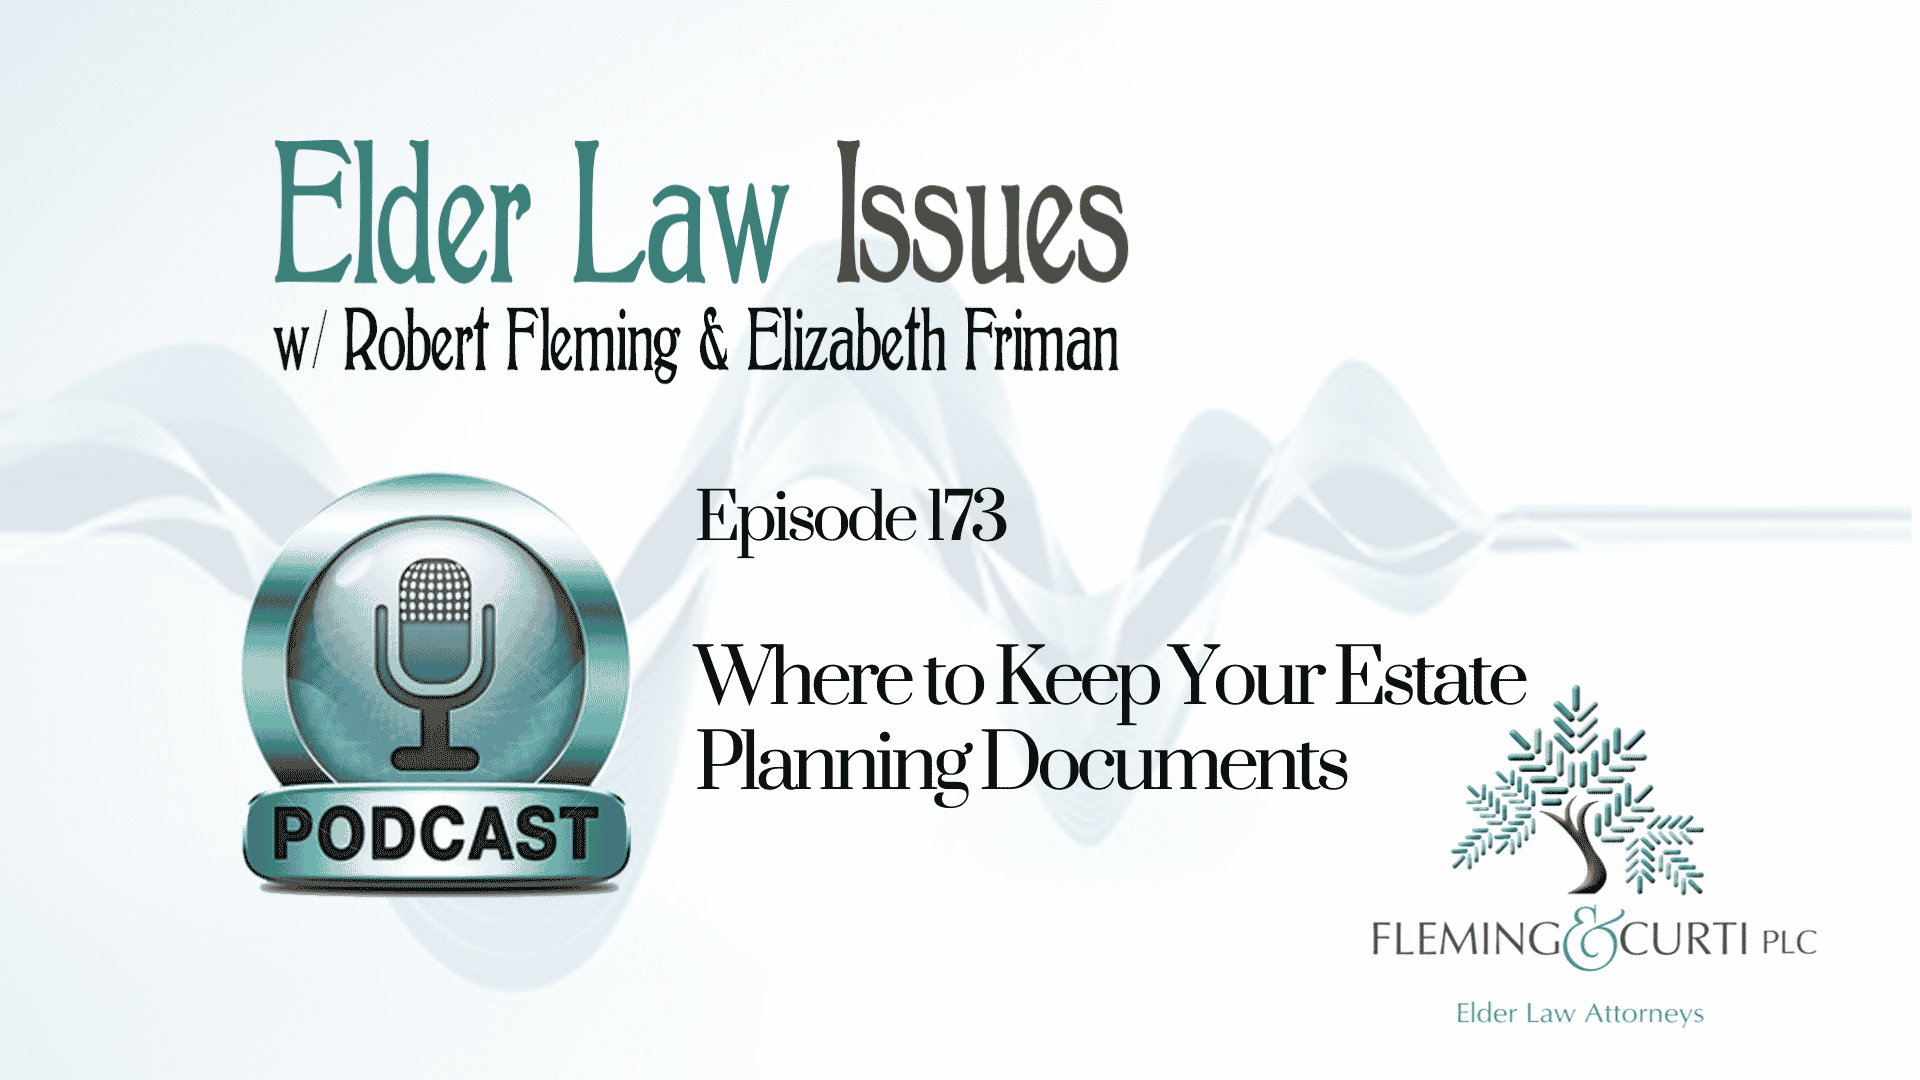 Where to Keep Your Estate Planning Documents